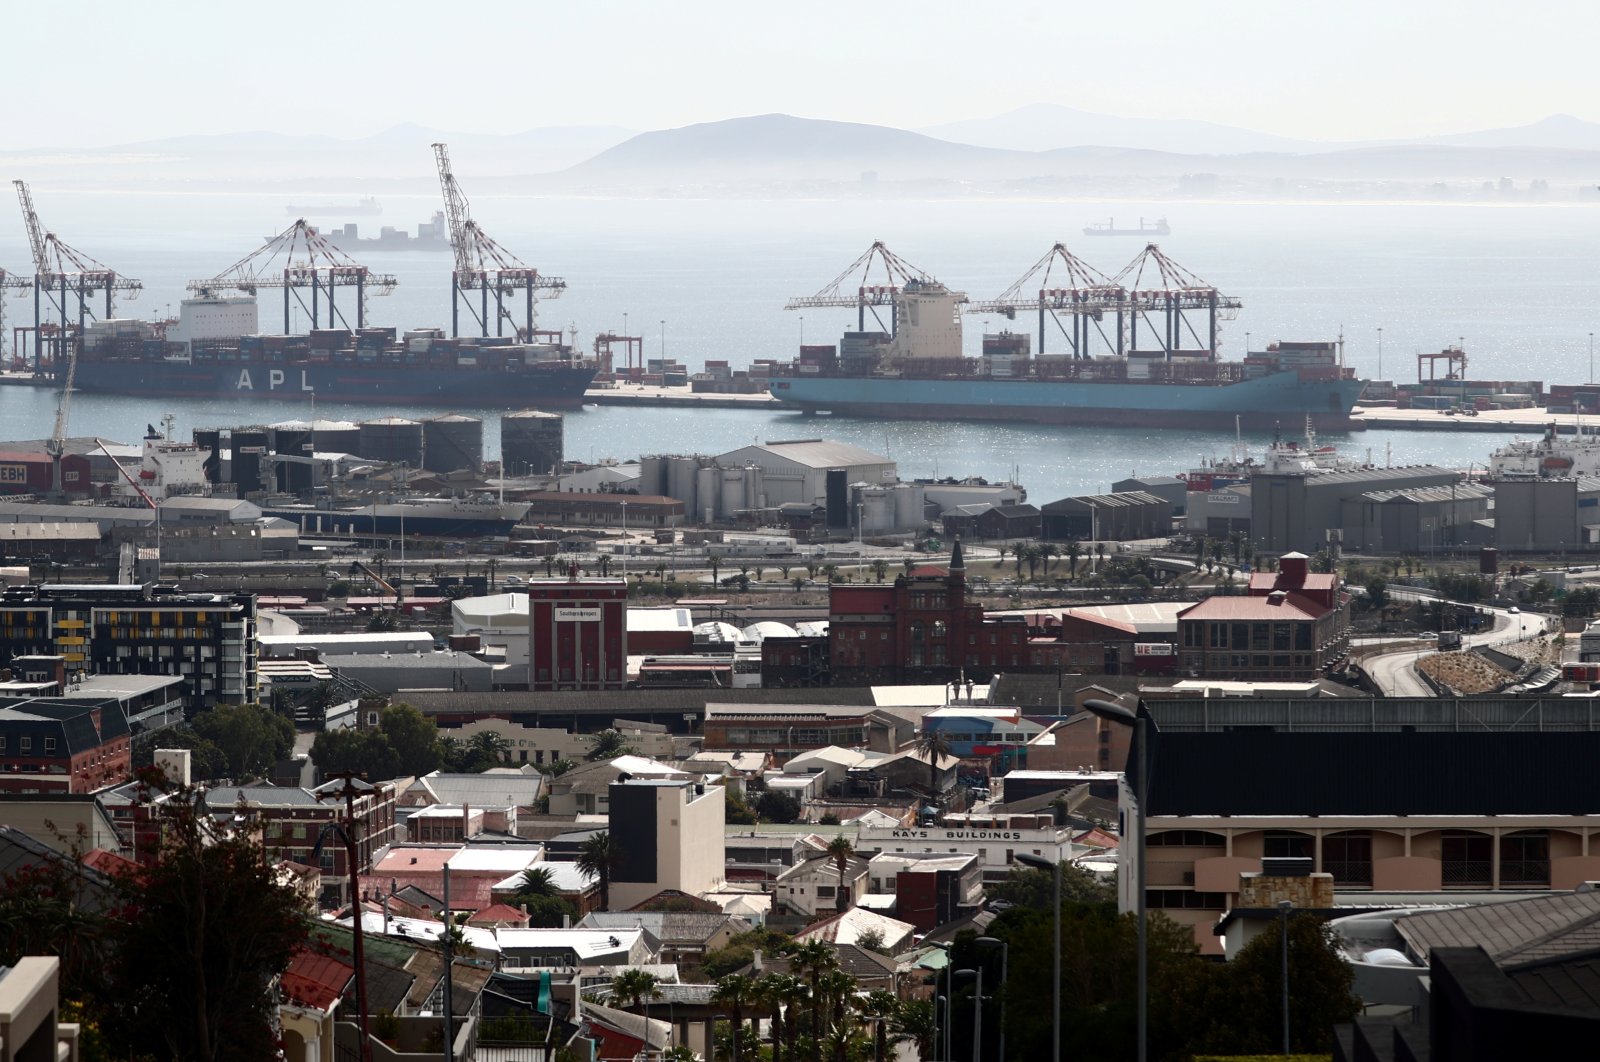 Container ships wait to load and offload goods in port during a 21-day nationwide lockdown aimed at limiting the spread of coronavirus disease (COVID-19) in Cape Town, South Africa, April 17, 2020. (Reuters Photo)